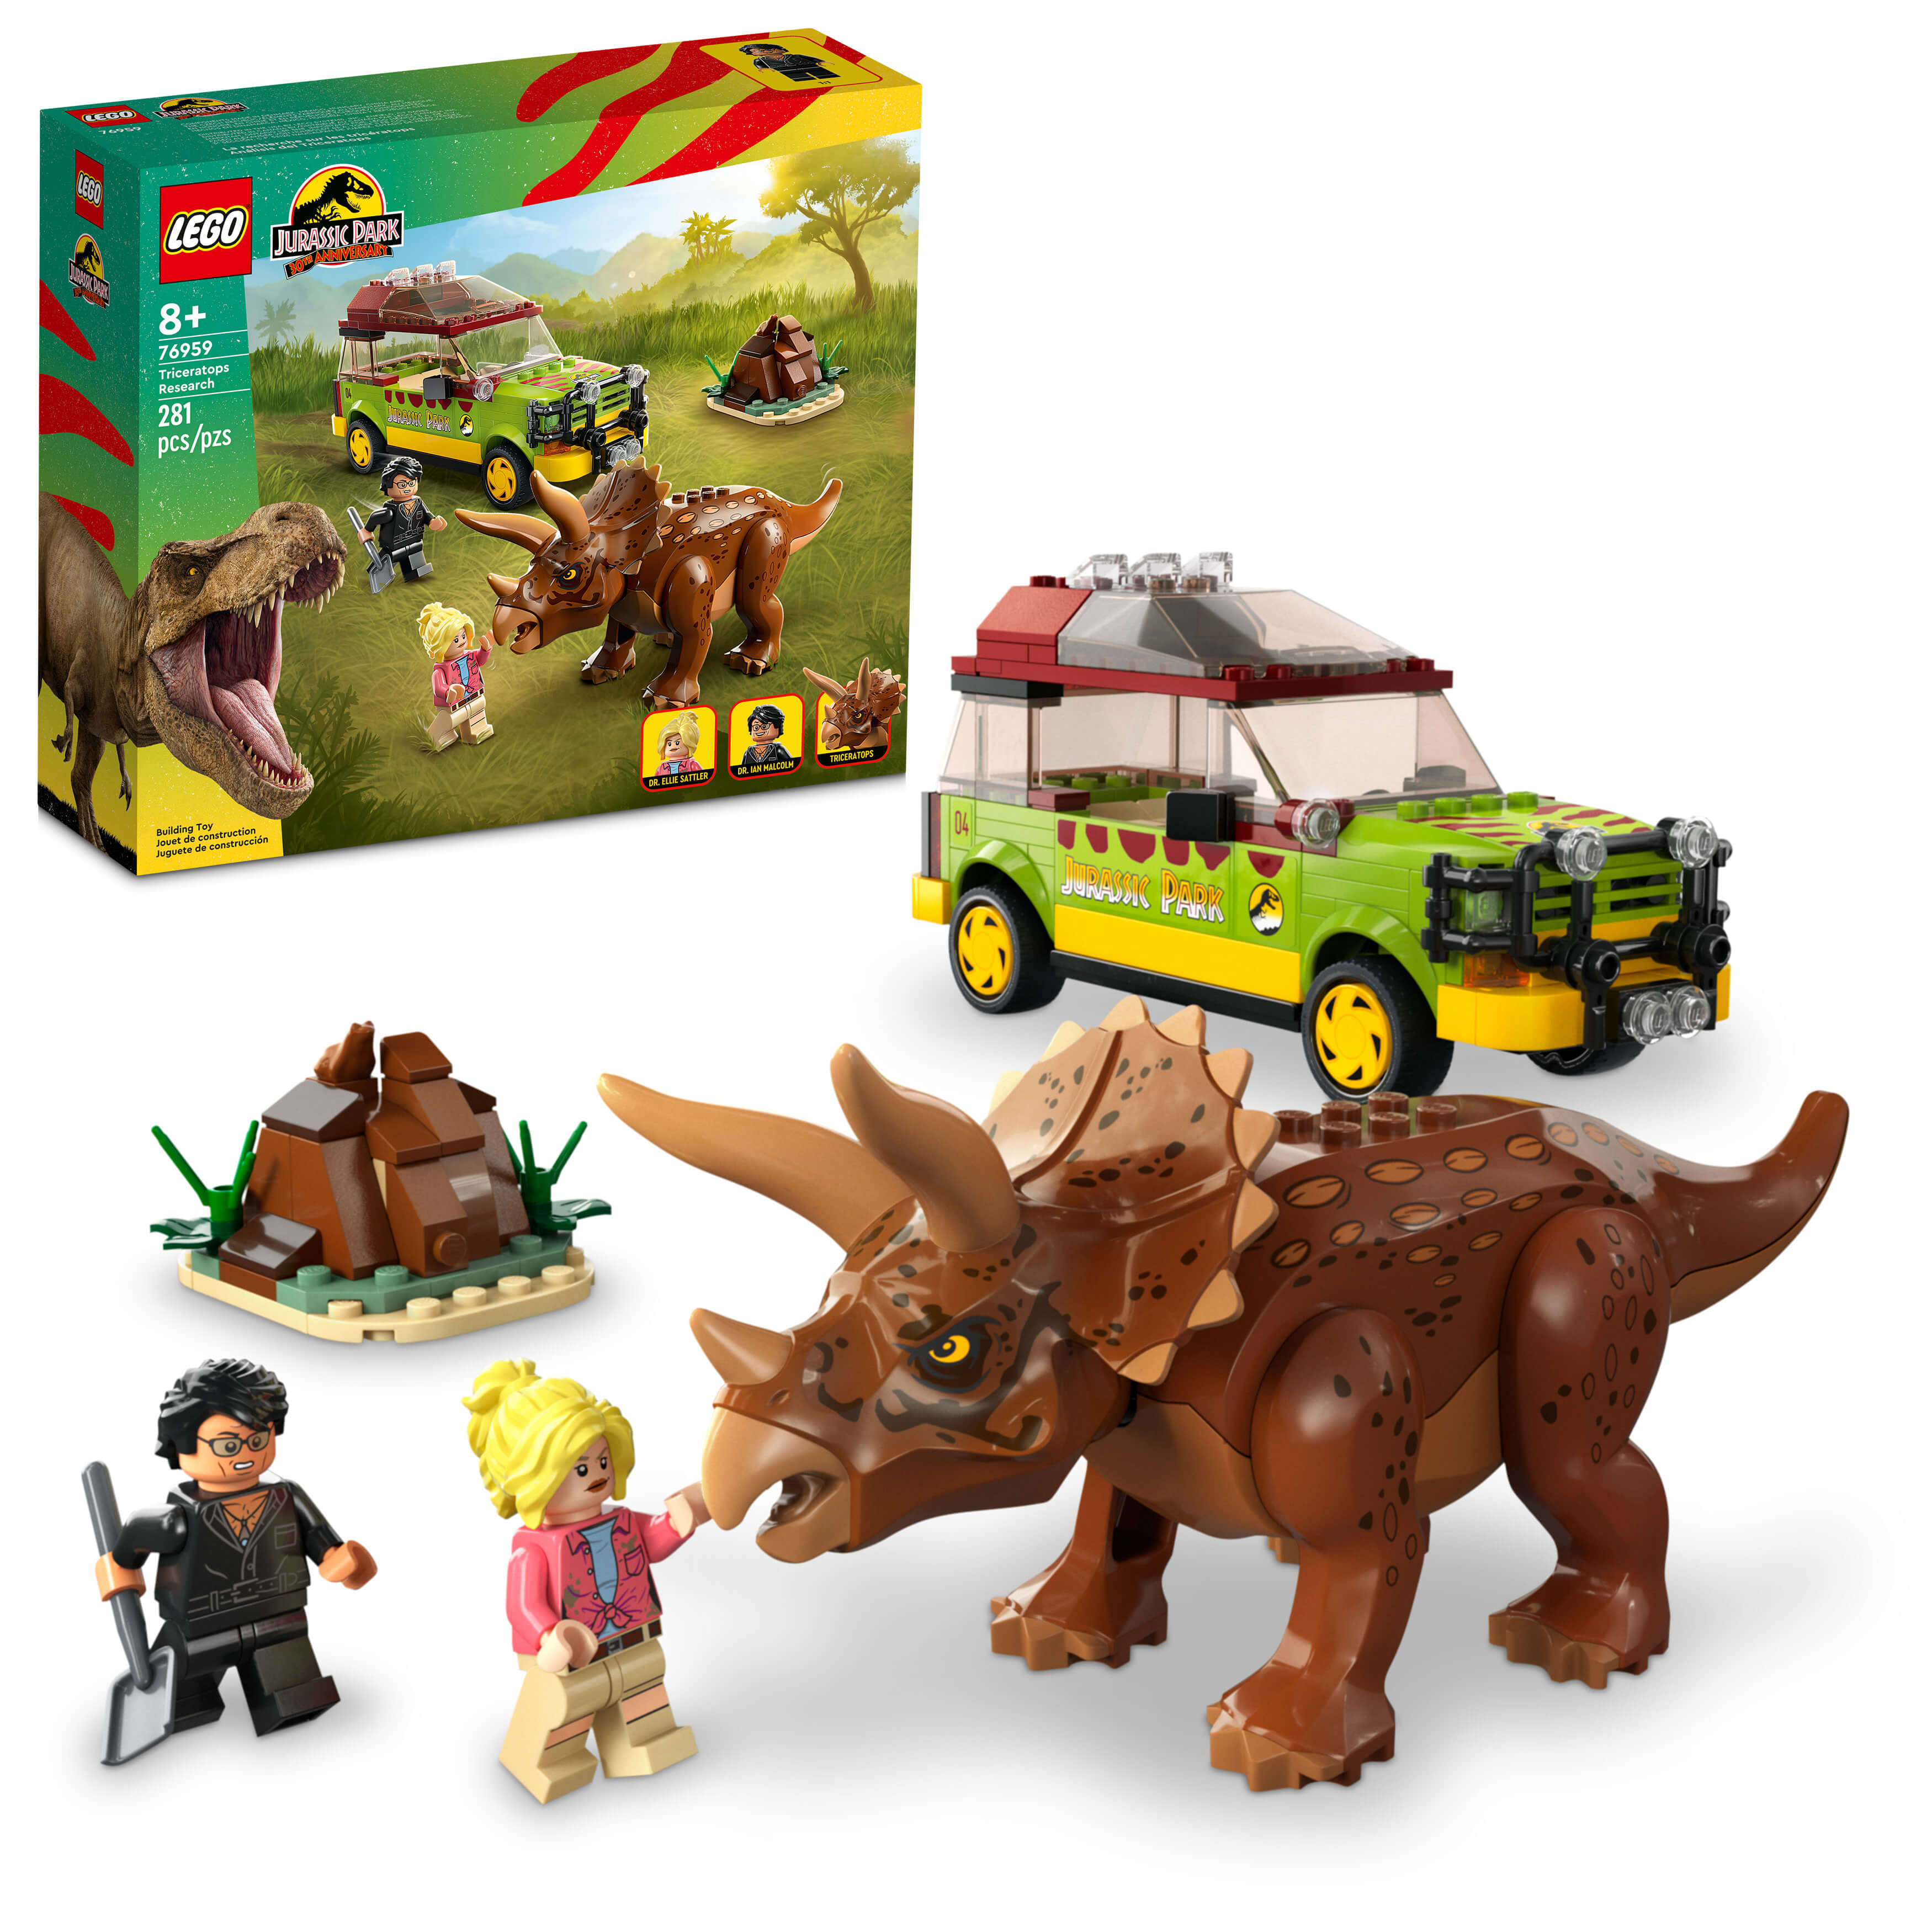 LEGO® Jurassic Park Triceratops Research 76959 Building Toy Set (281 Pieces)